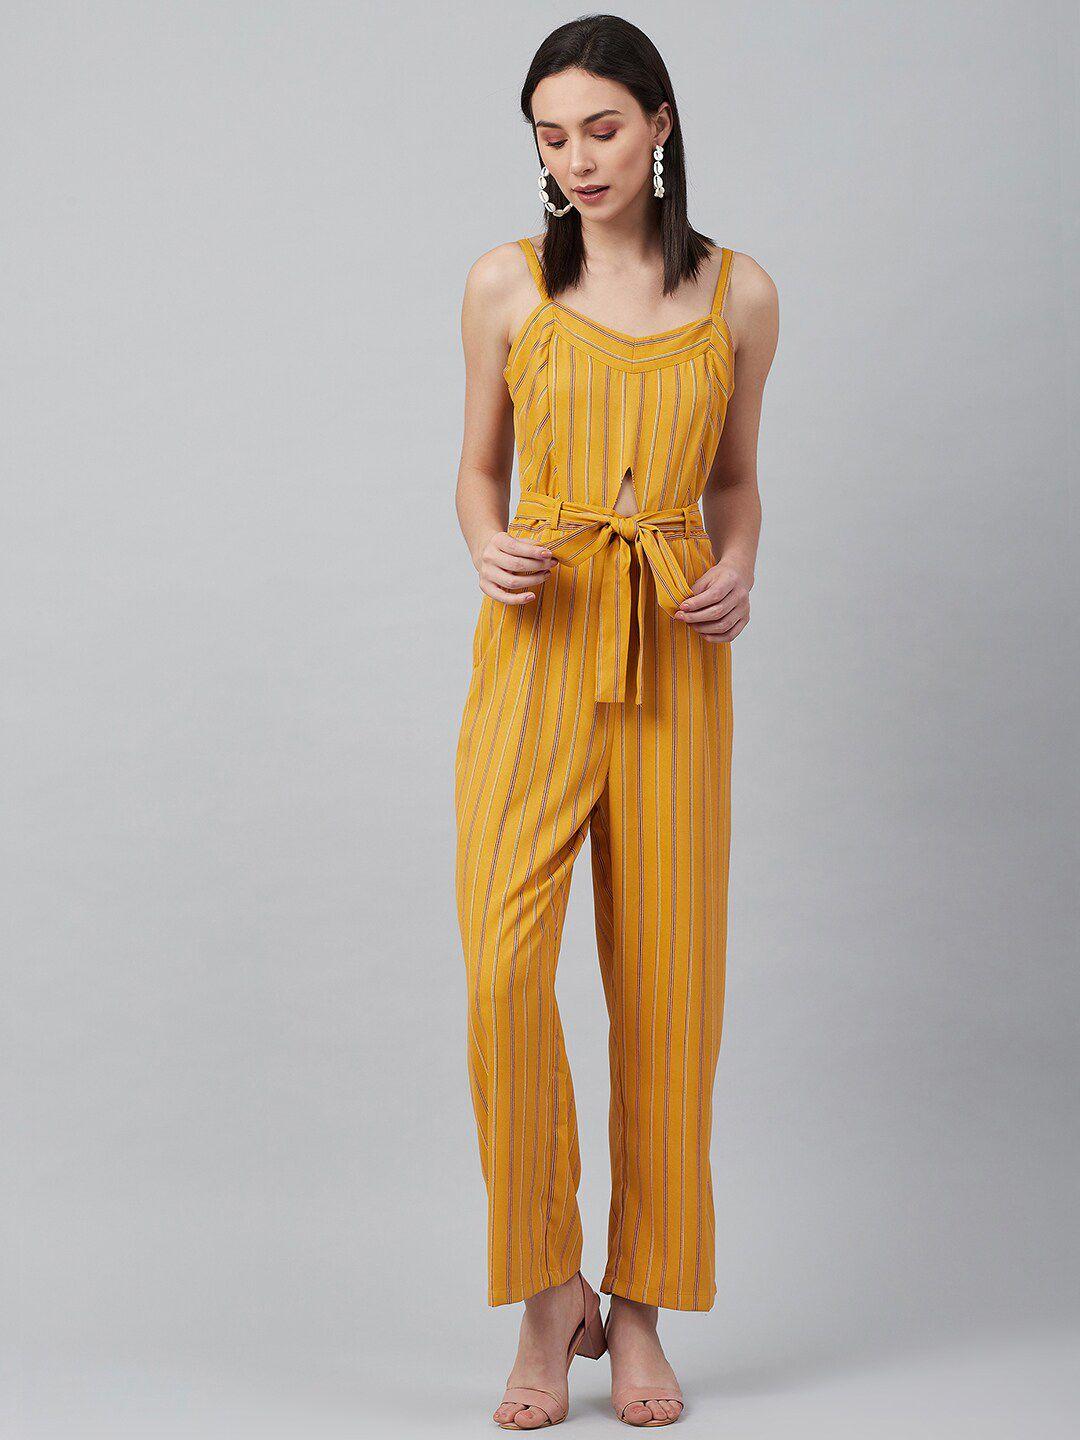 marie-claire-women-mustard-&-maroon-striped-basic-jumpsuit